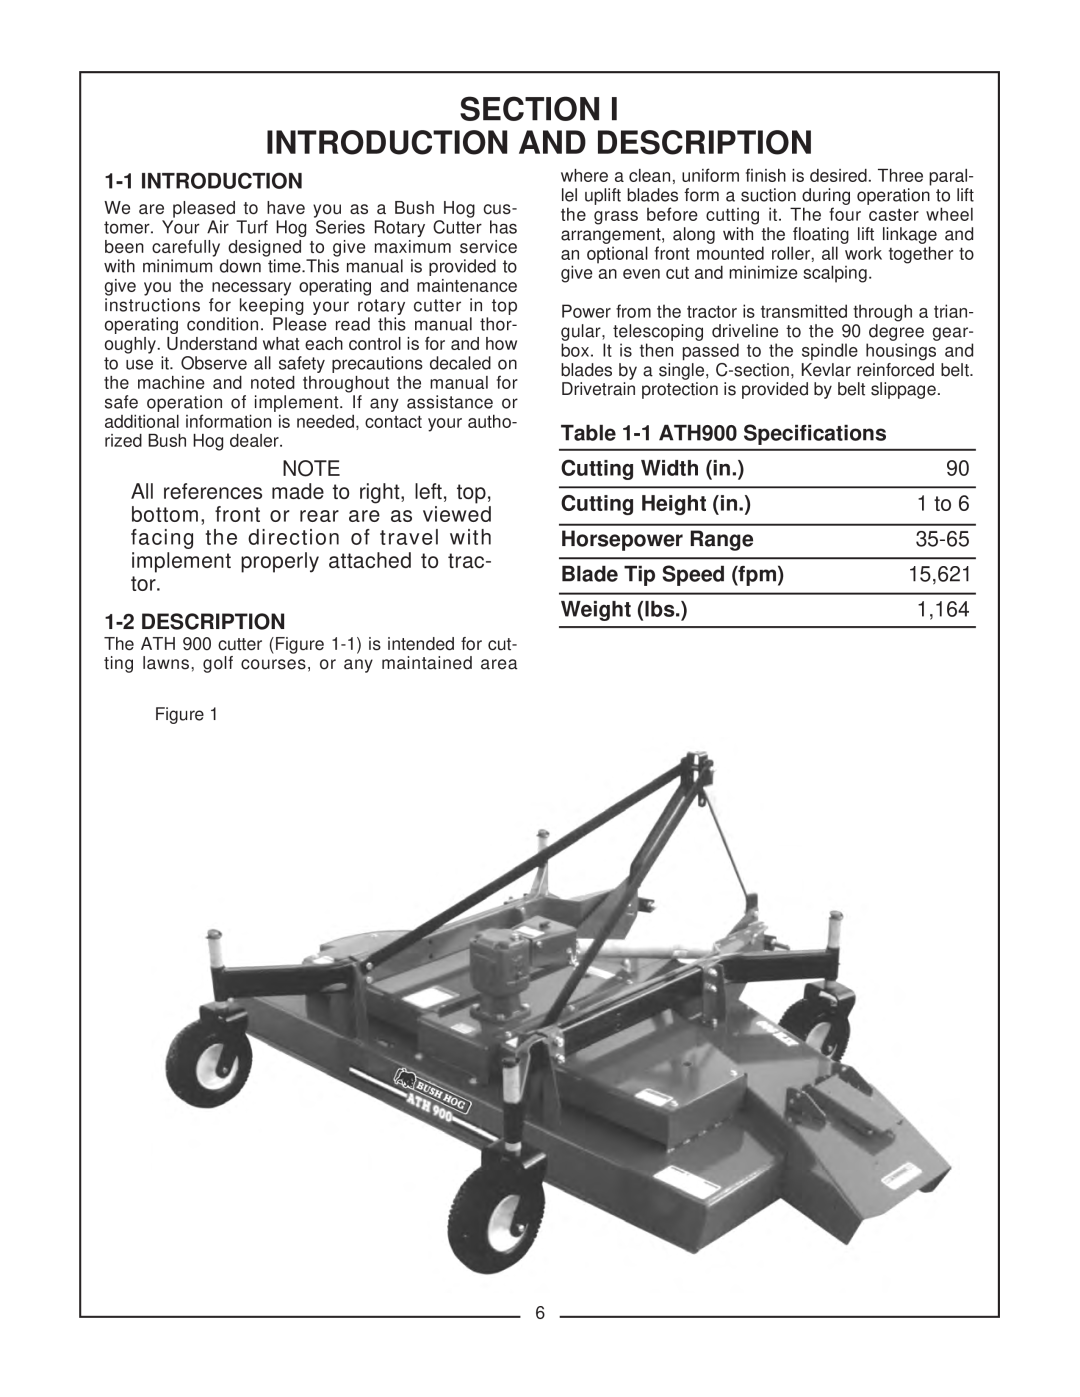 Bush Hog ATH 900 manual Section, Introduction And Description, 1 ATH900 Specifications, Cutting Width in, Cutting Height in 